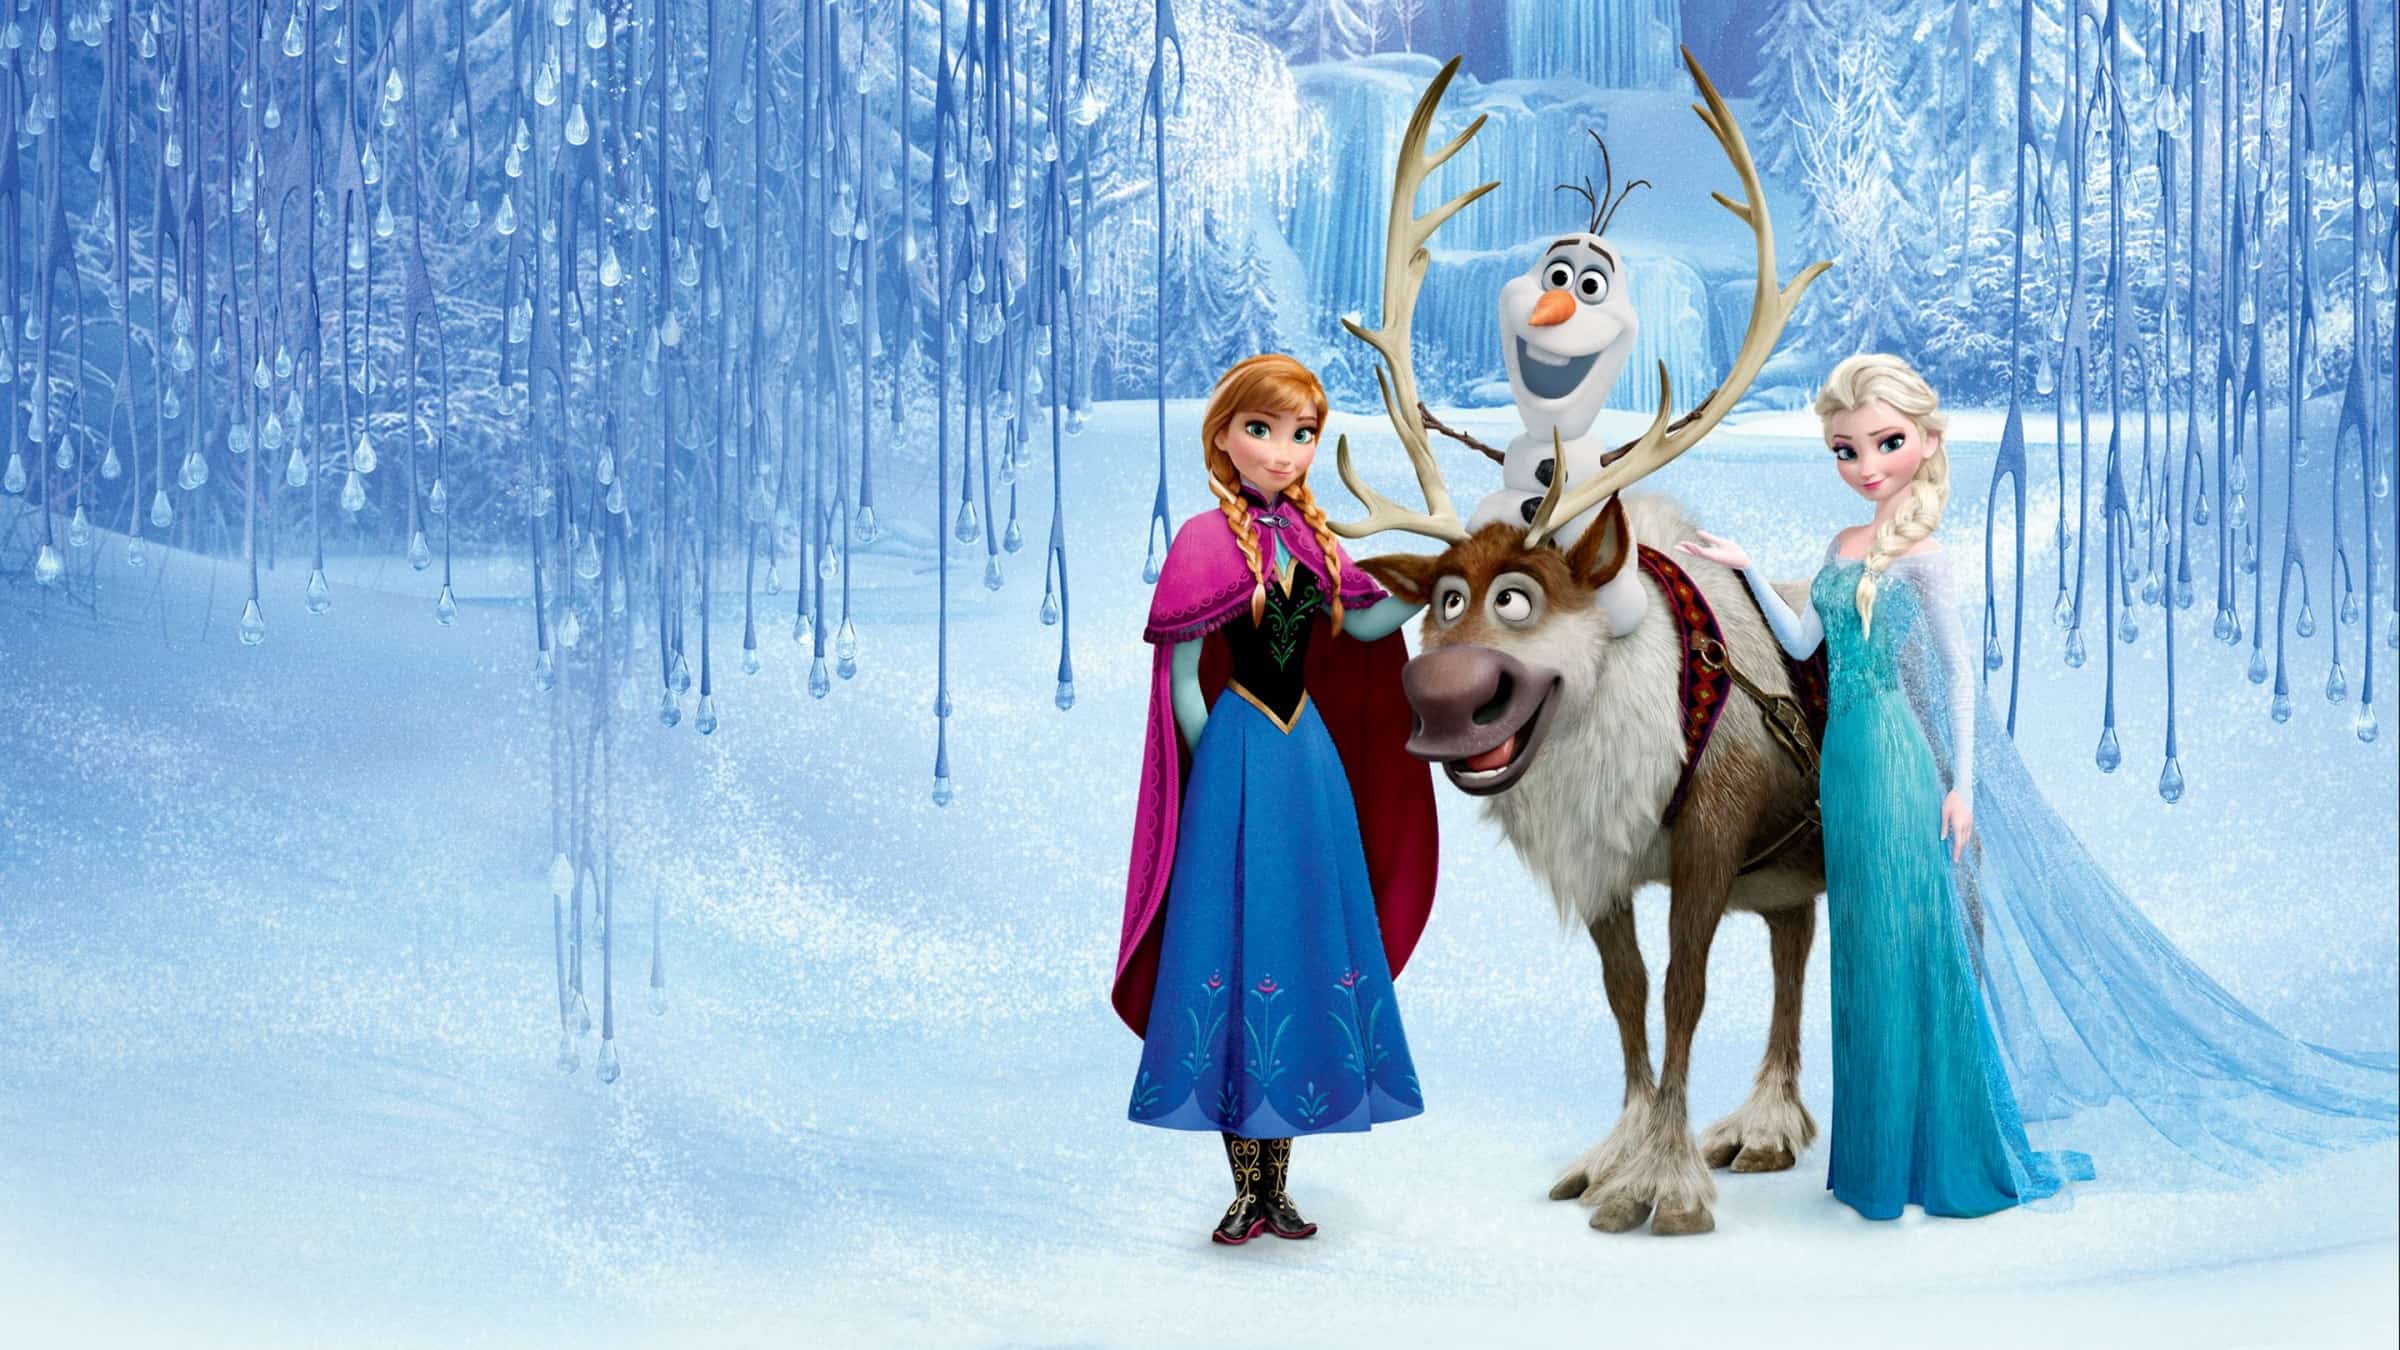 Think you can complete these 'Frozen' song lyrics? Take our quiz and